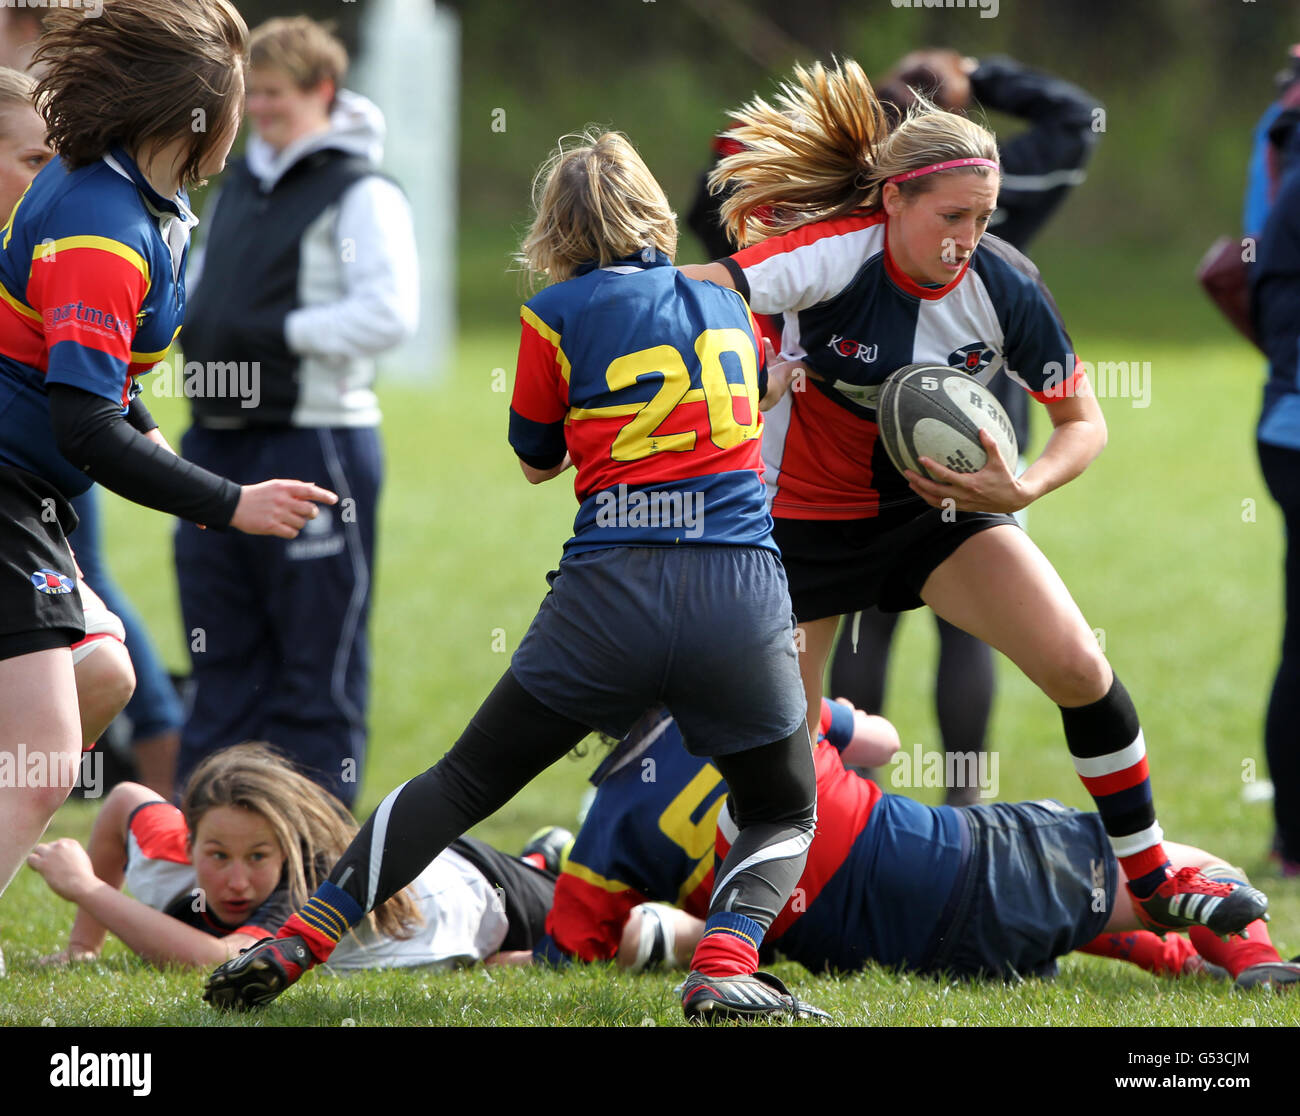 Rugby Union - Women's Cup Qualifying Games - Cartha Queens Park RFC. Action between Murrayfield Wanderers and Broughton during the Women's Cup Qualifying Games at Cartha Queens Park RFC, Glasgow. Stock Photo